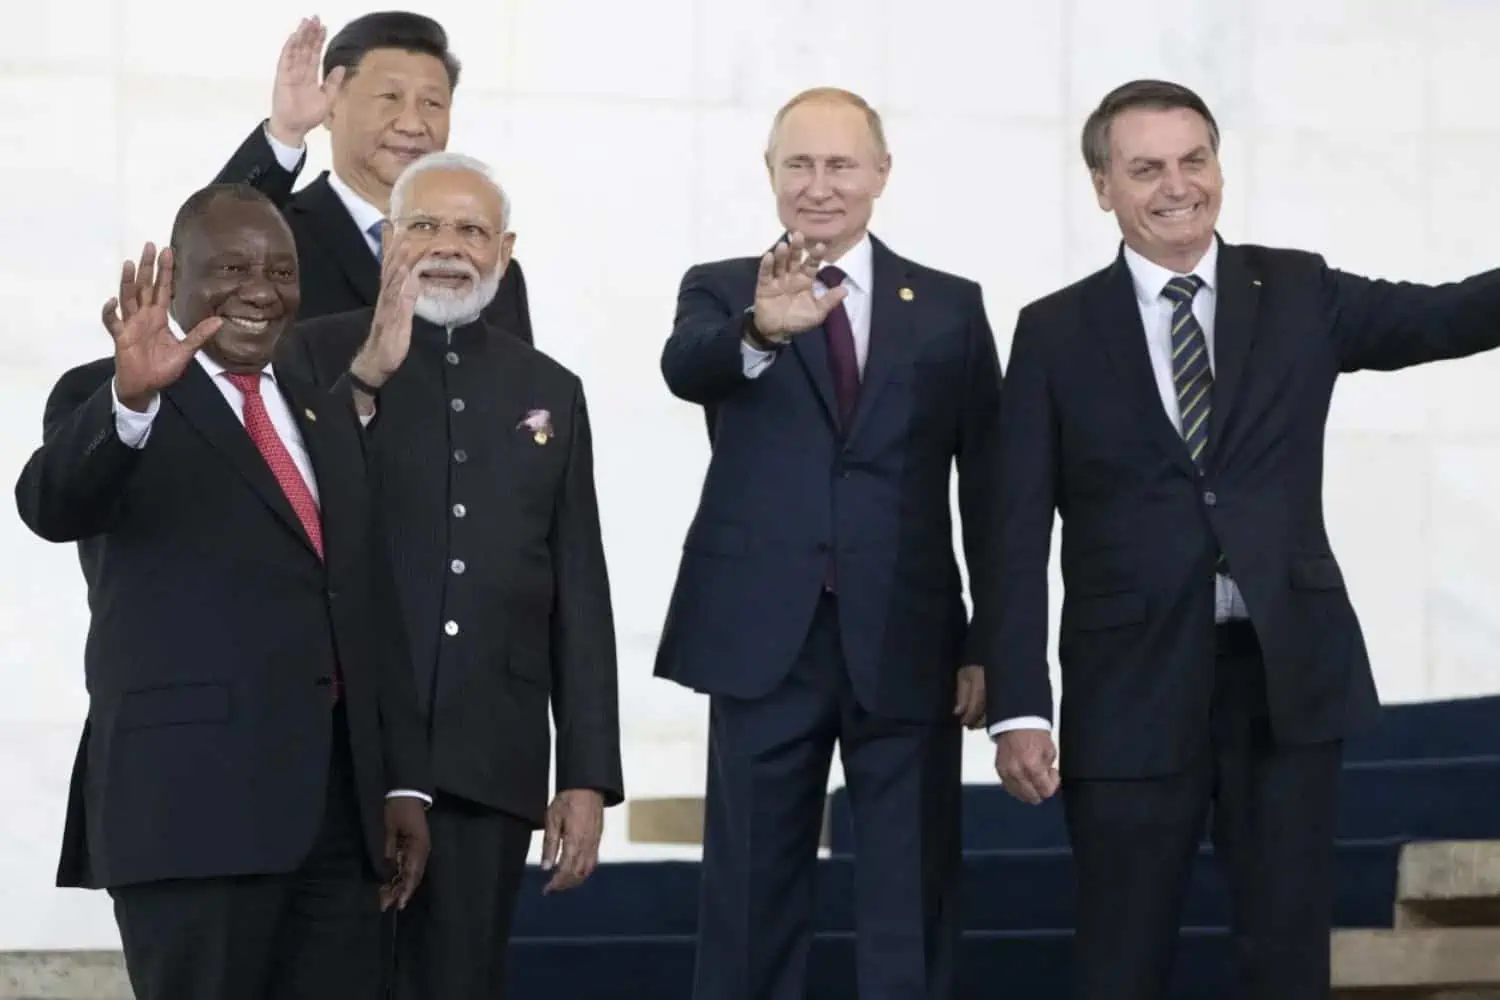 TODAY: South Africa's Top News for 4 March 2022 - Ramaphosa to take "tougher stance" on Russia